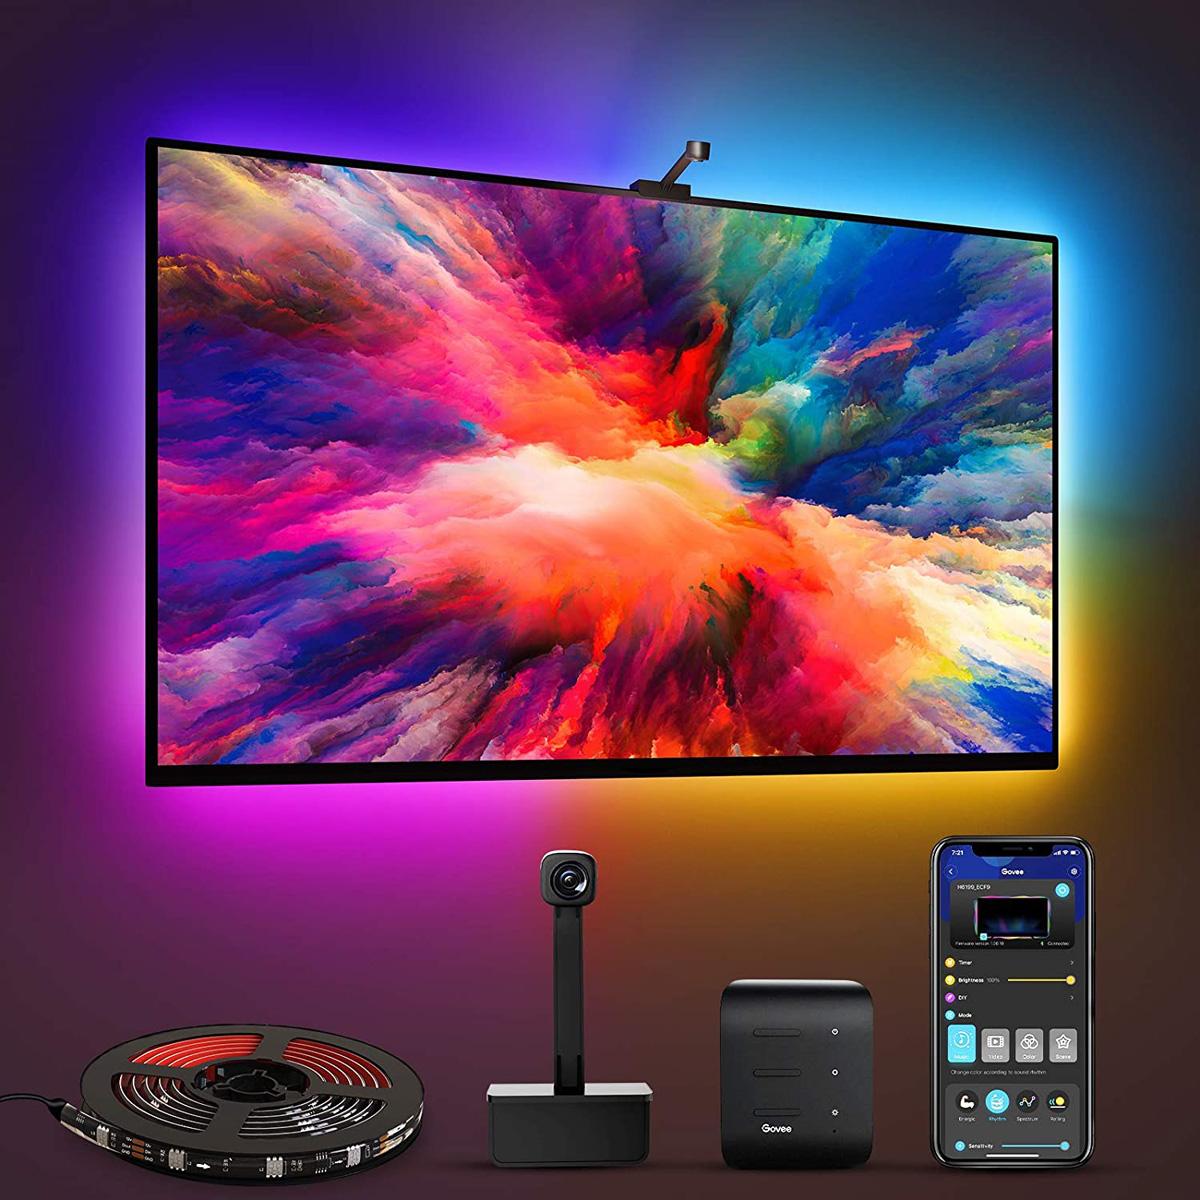 Govee Immersion WiFi TV LED Backlights with Camera for $48.99 Shipped